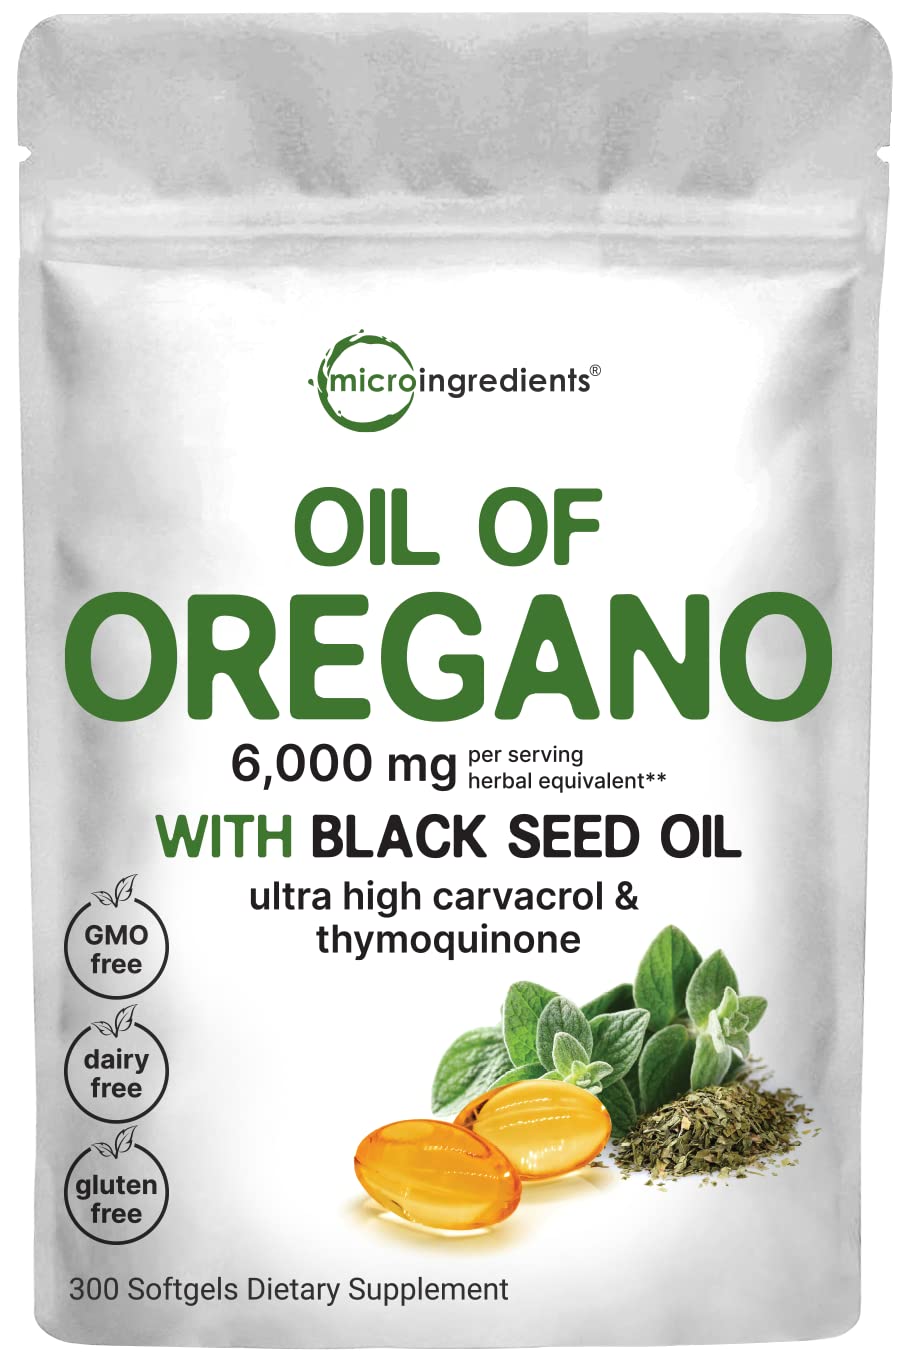 Micro Ingredients Oil of Oregano Softgels 6000mg Per Serving, 300 Count | with Black Seed Oil, 4X Strength Carvacrol & Thymoquinone | Plant Based, Non-GMO | Antioxidant & Immune Support